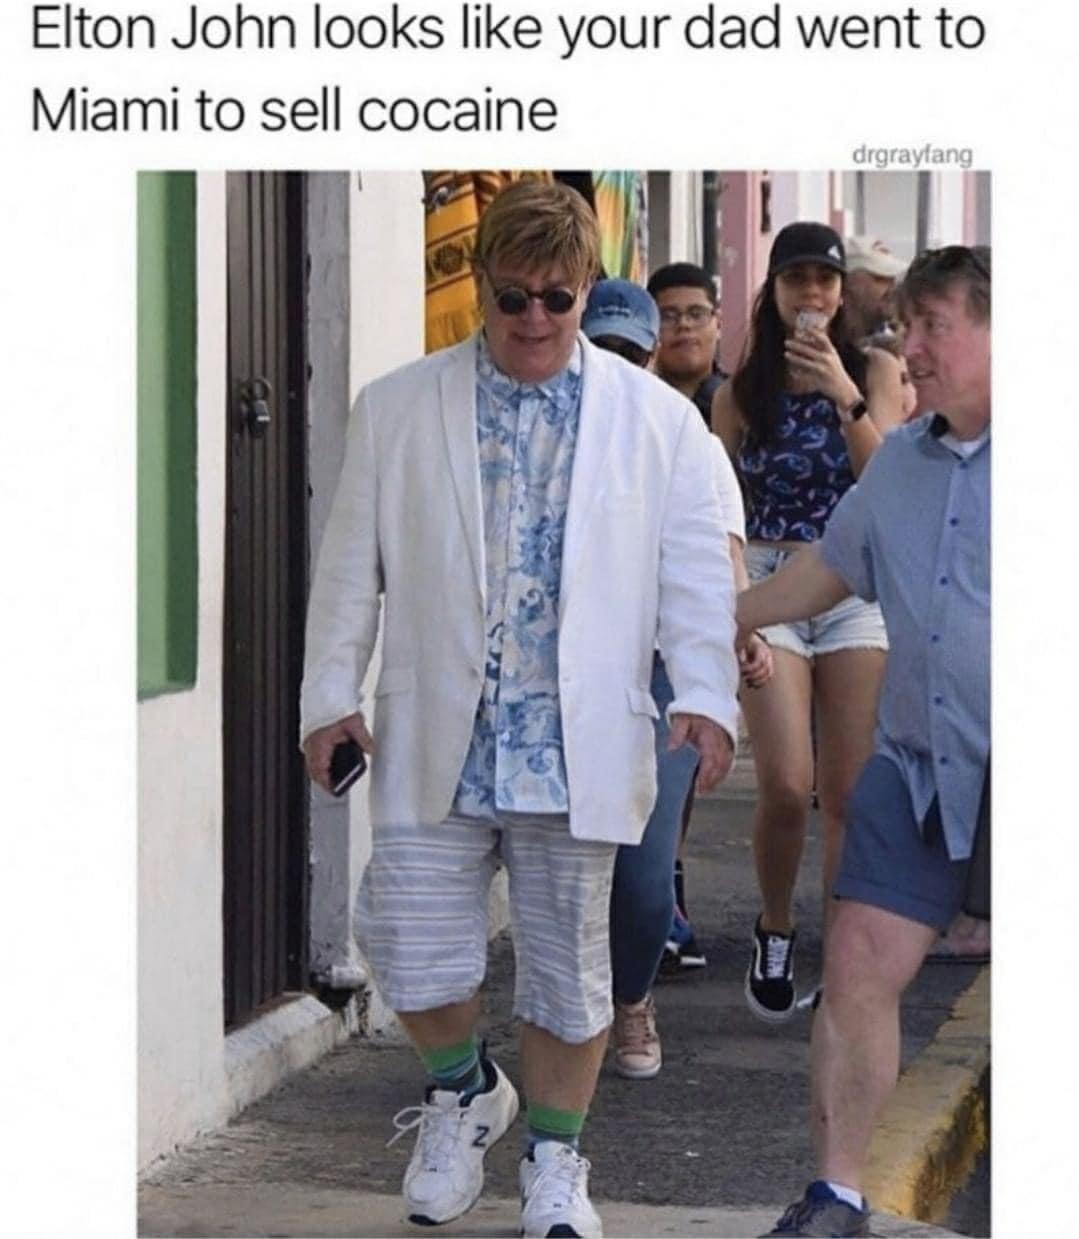 dank memes --  do old men where new balance - Elton John looks your dad went to Miami to sell cocaine drgrayfang